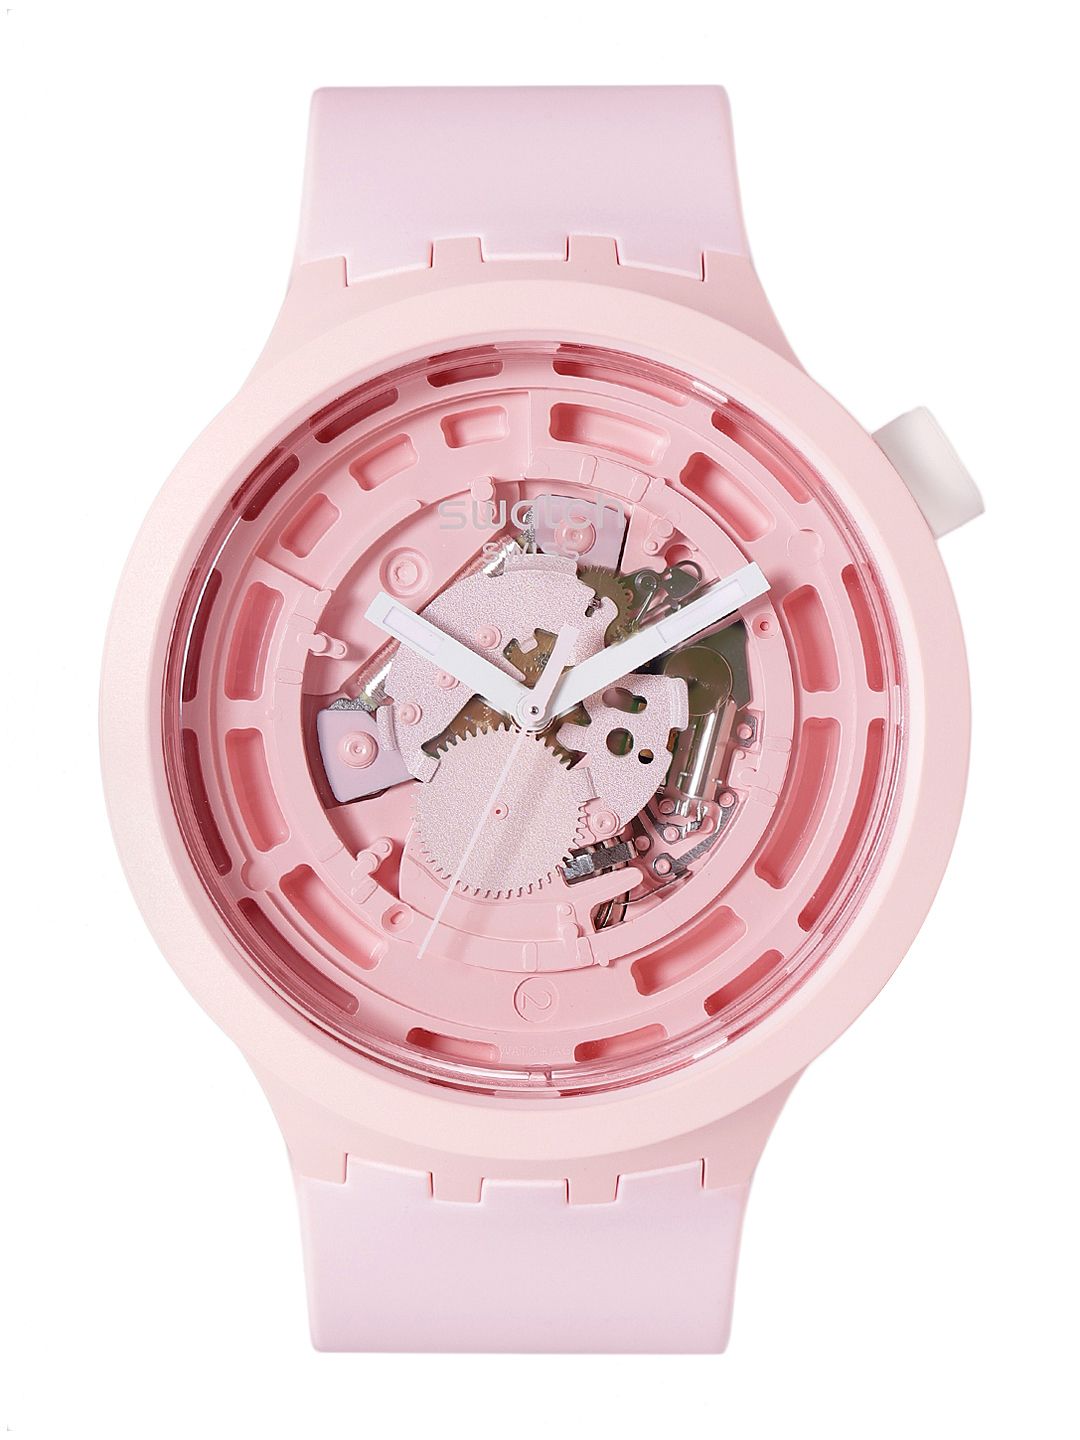 Swatch Unisex Pink Boost Swiss Made Skeleton Dial Water Resistant Analogue Watch SB03P100 Price in India